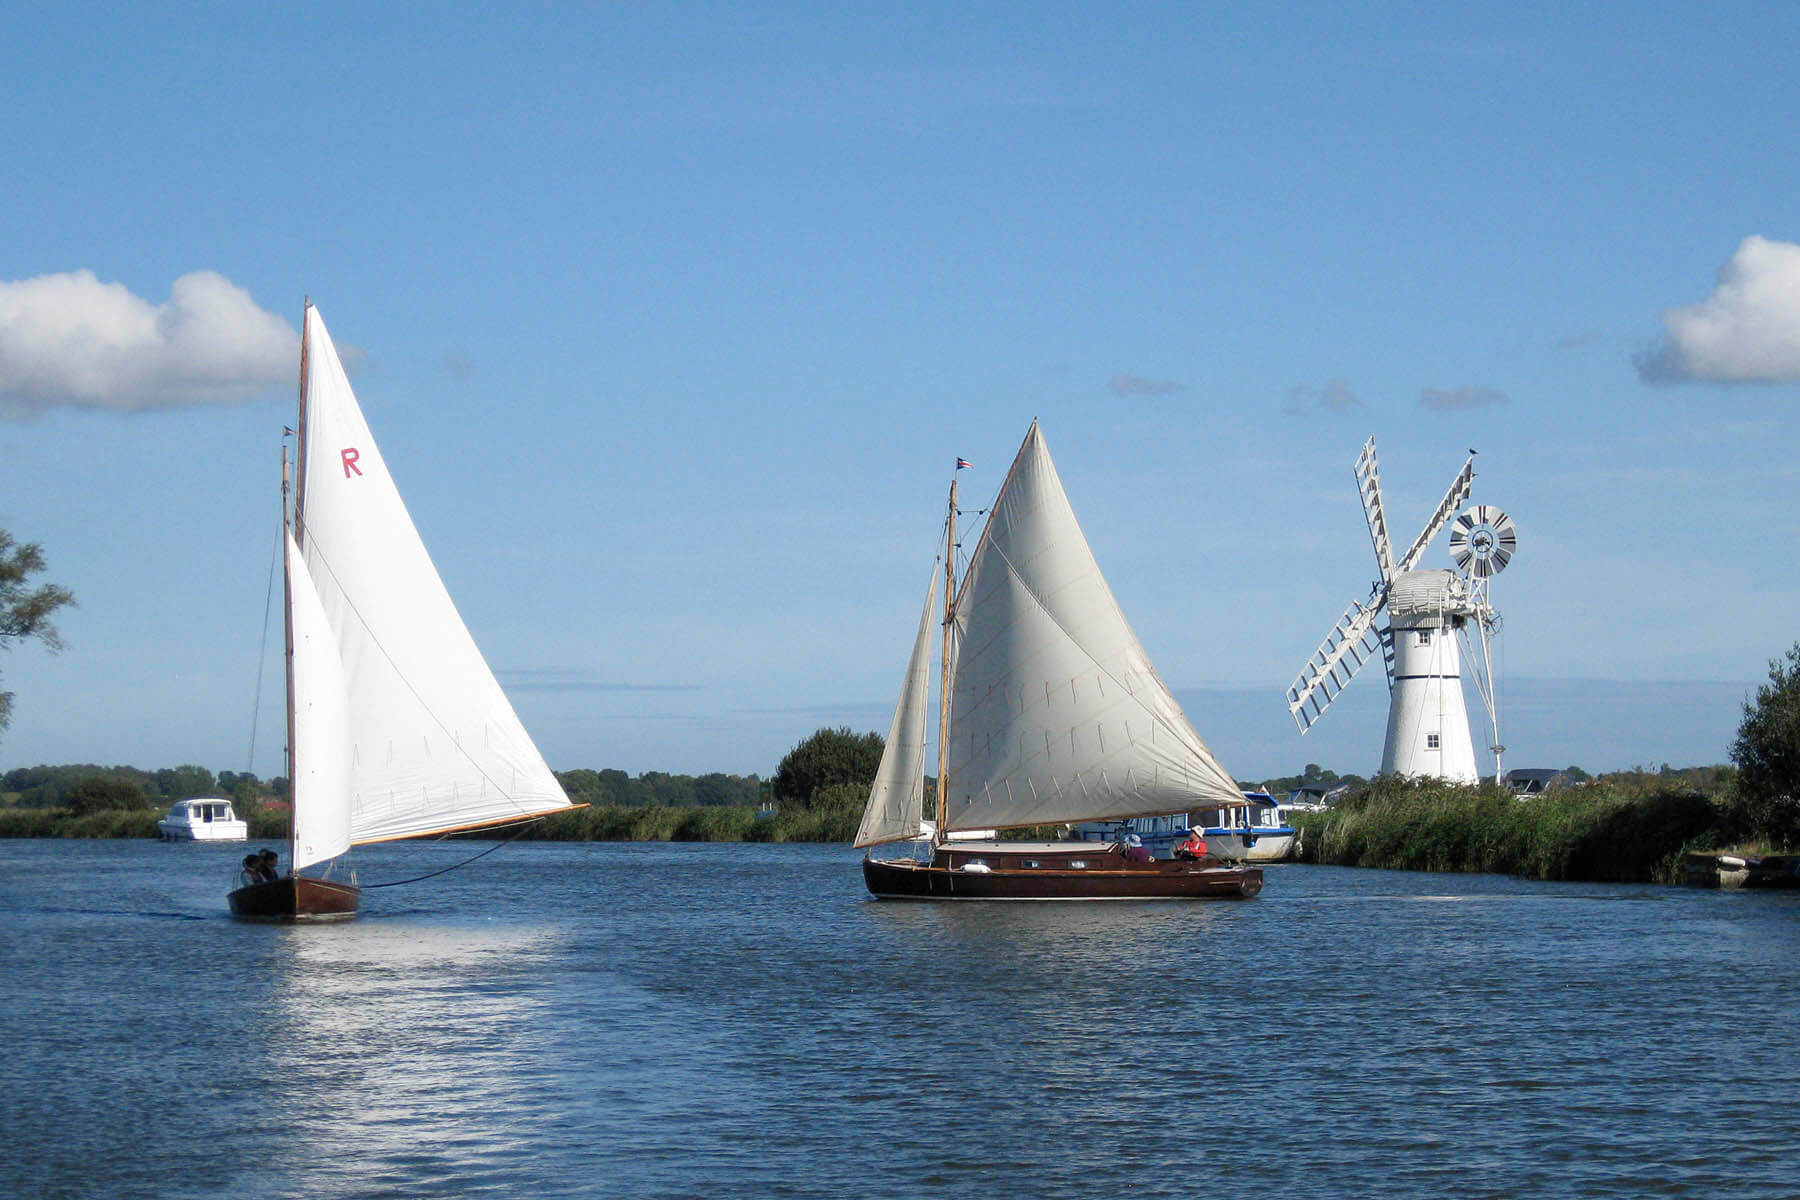 The Broads National Park: my complete guide​ and best things to do in the Broads